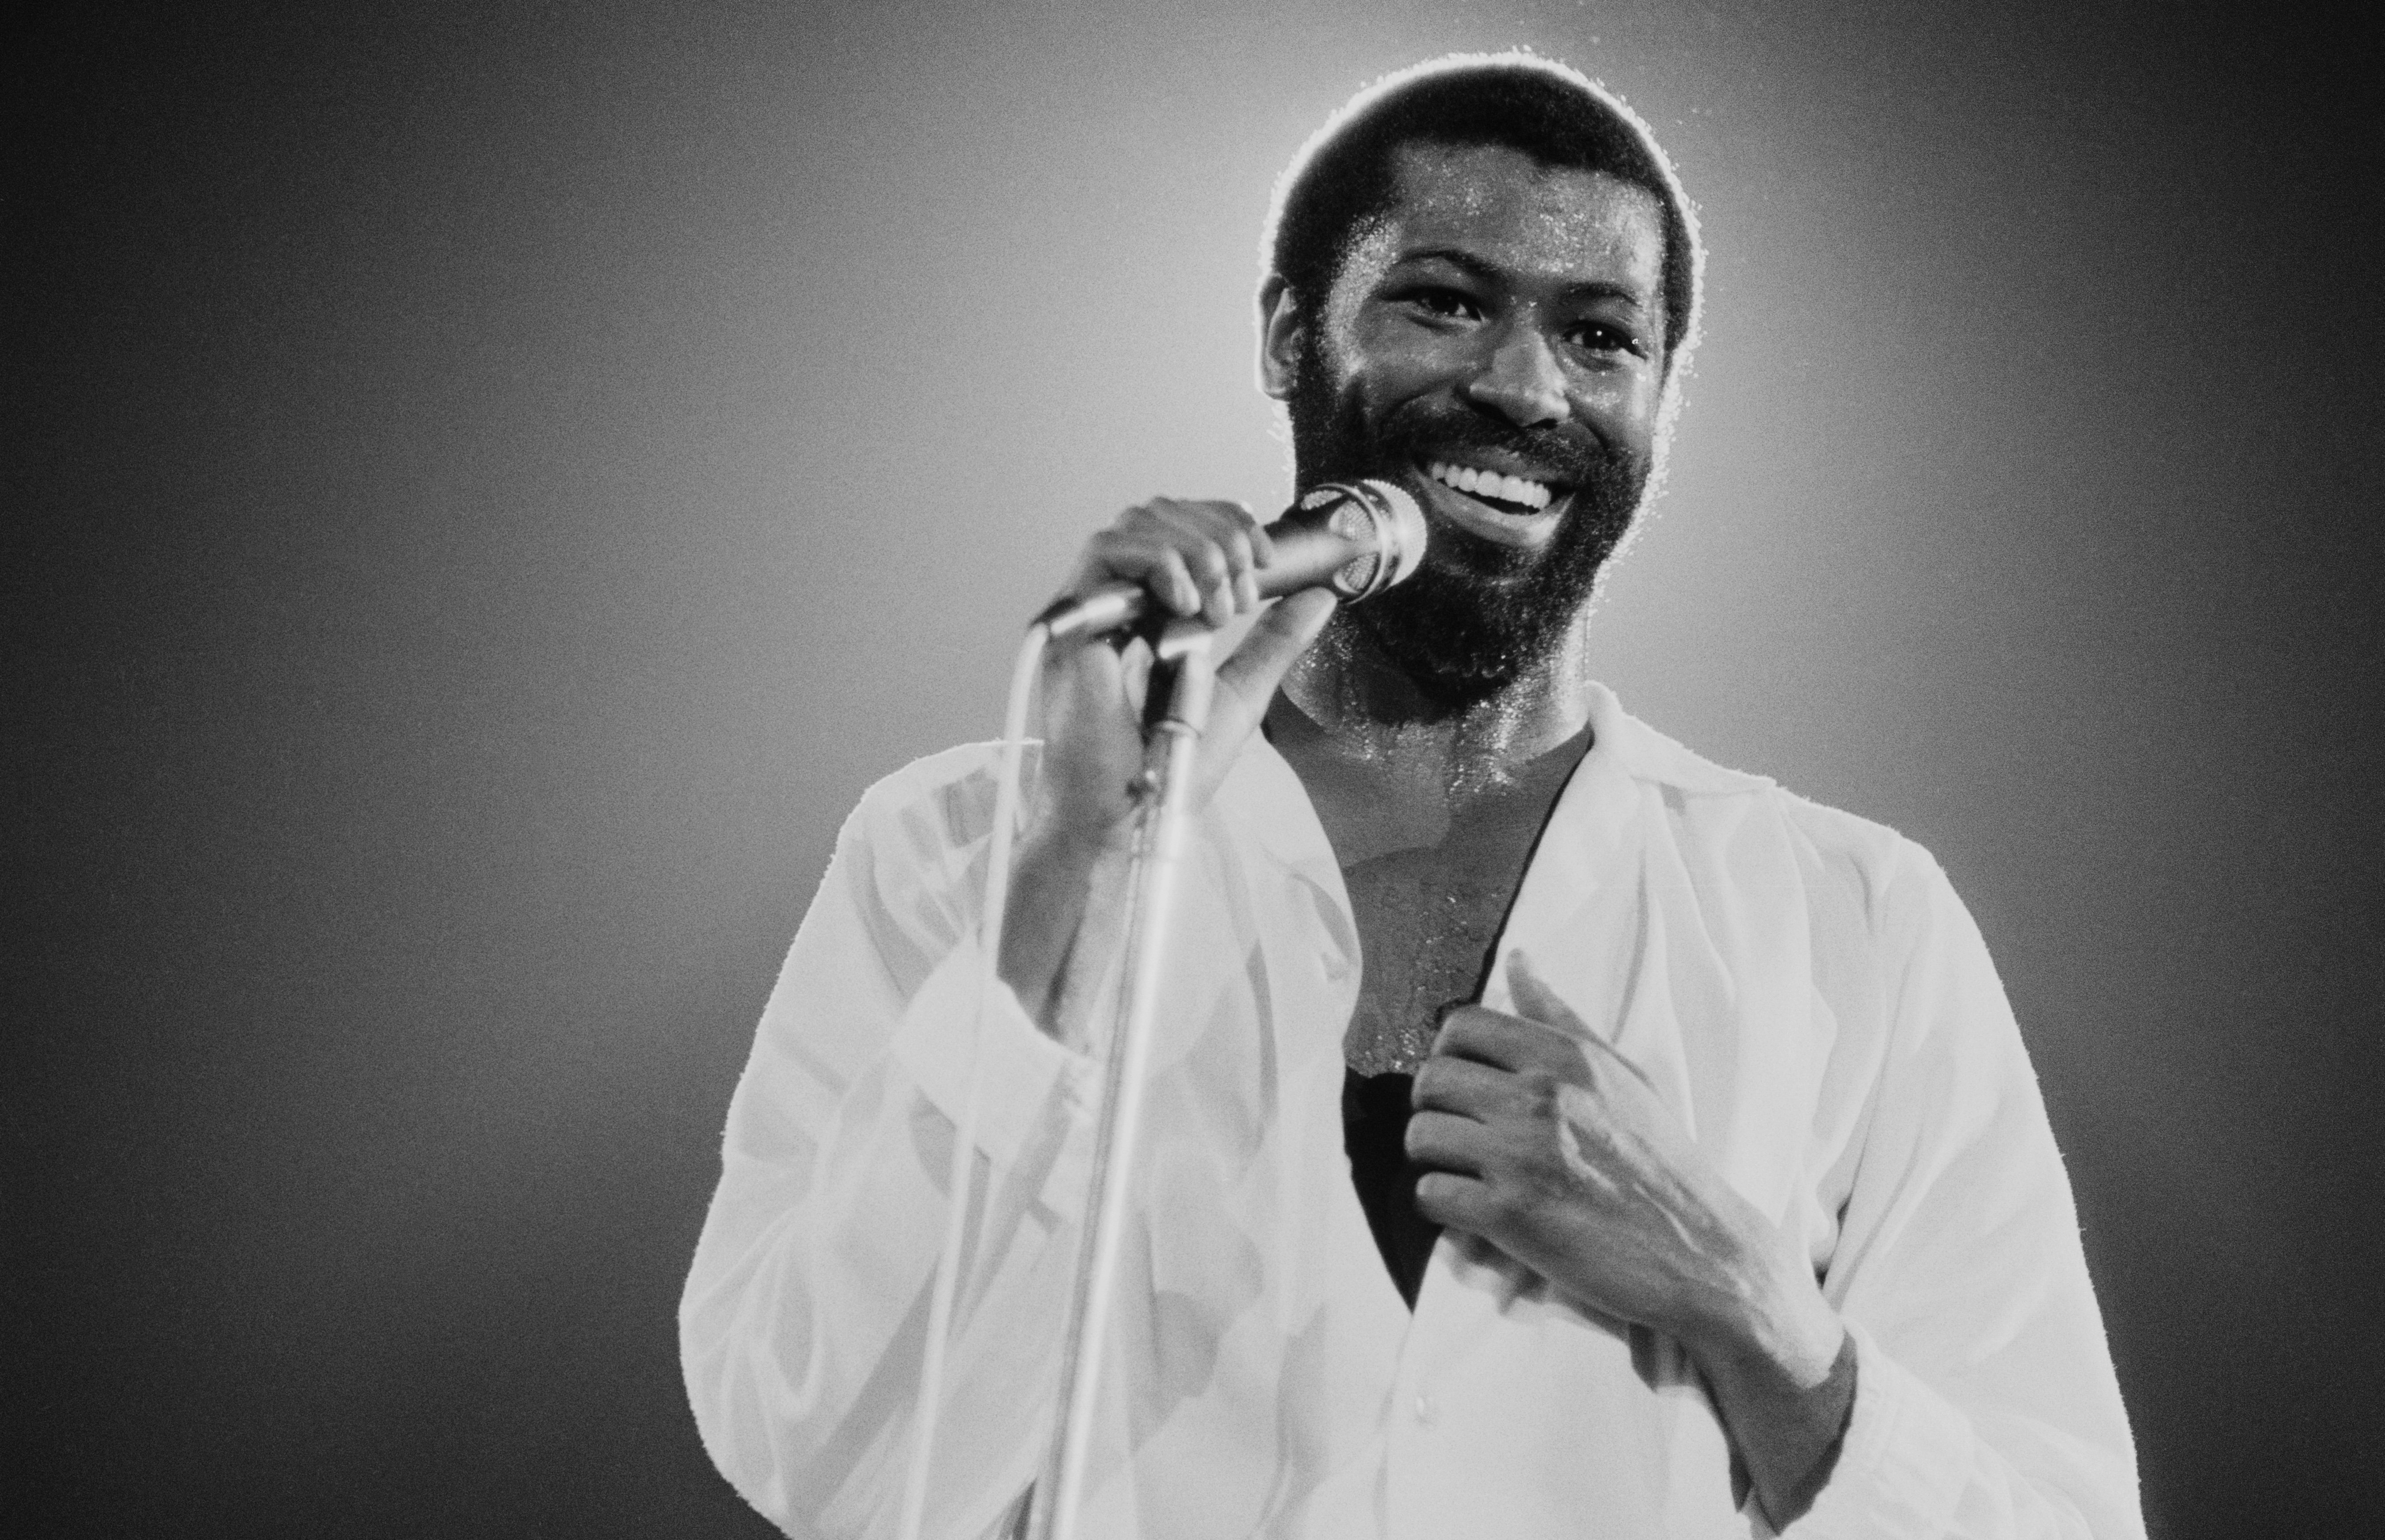 Teddy Pendergrass performing in New York, 1981. | Photo: Getty Images